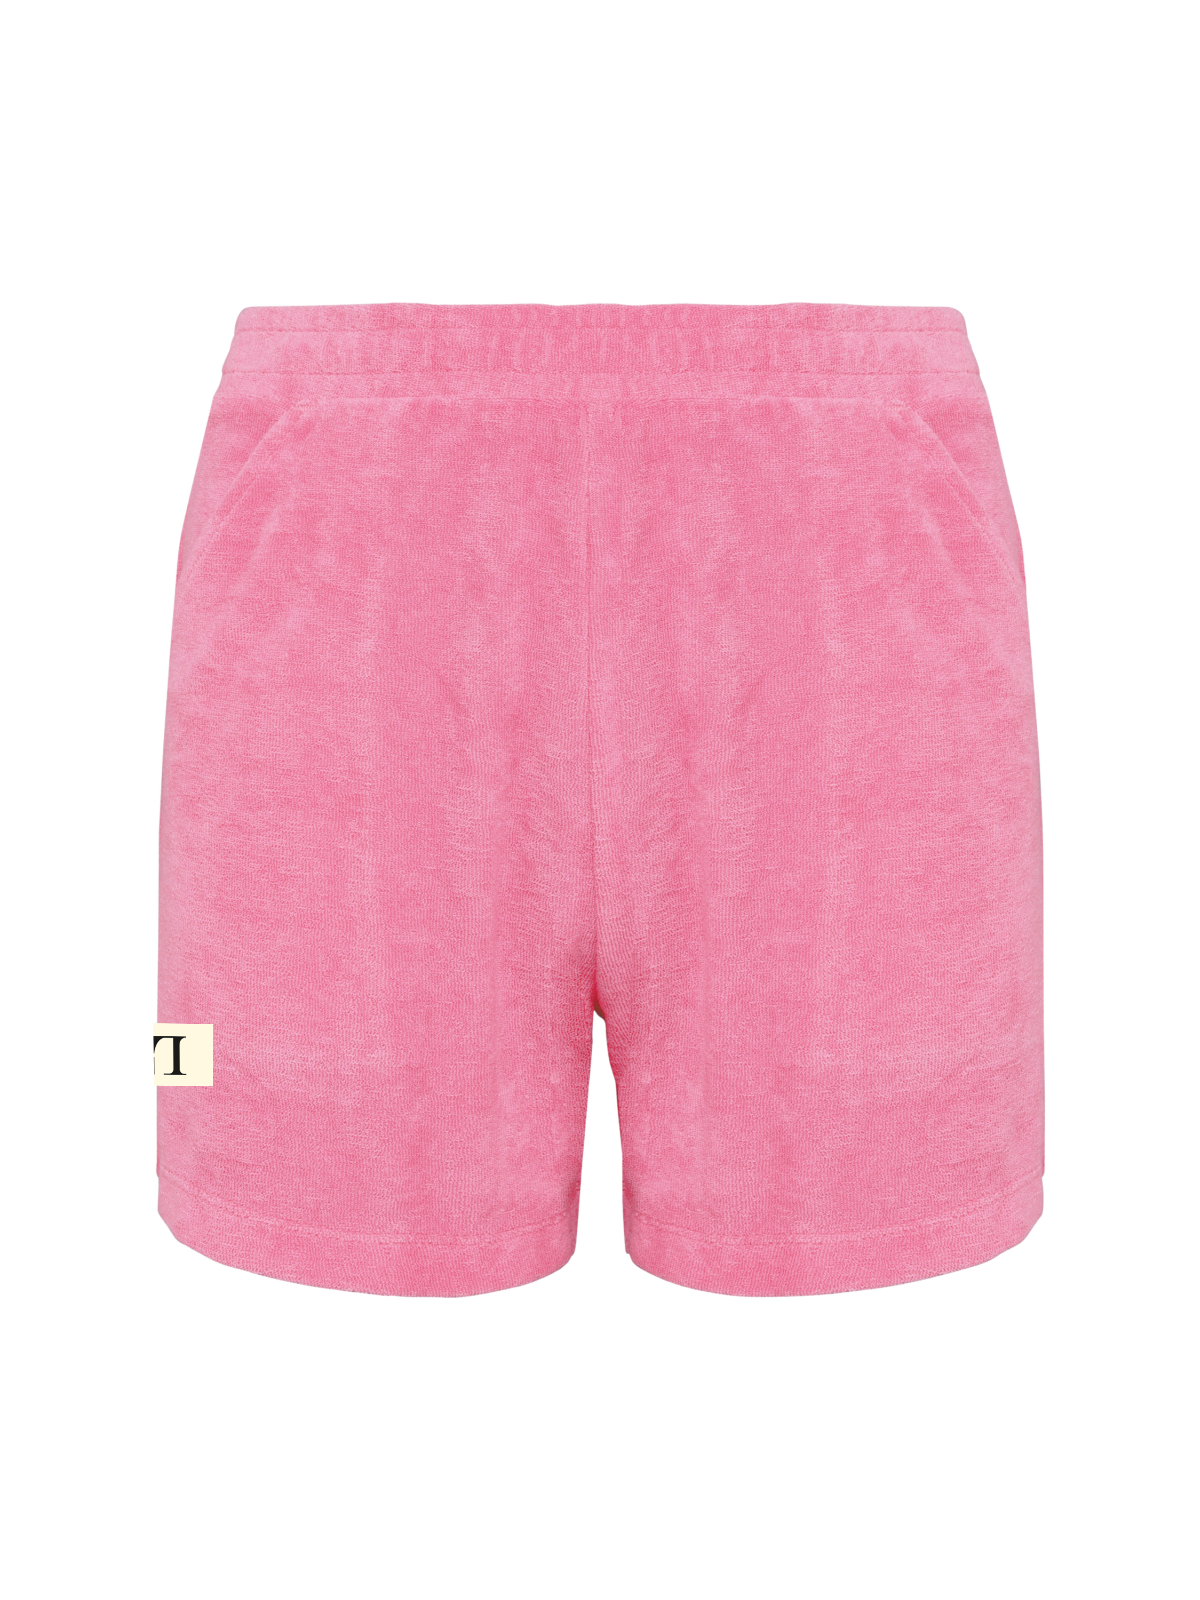 LL Terry Towel Girly Shorts candy rose